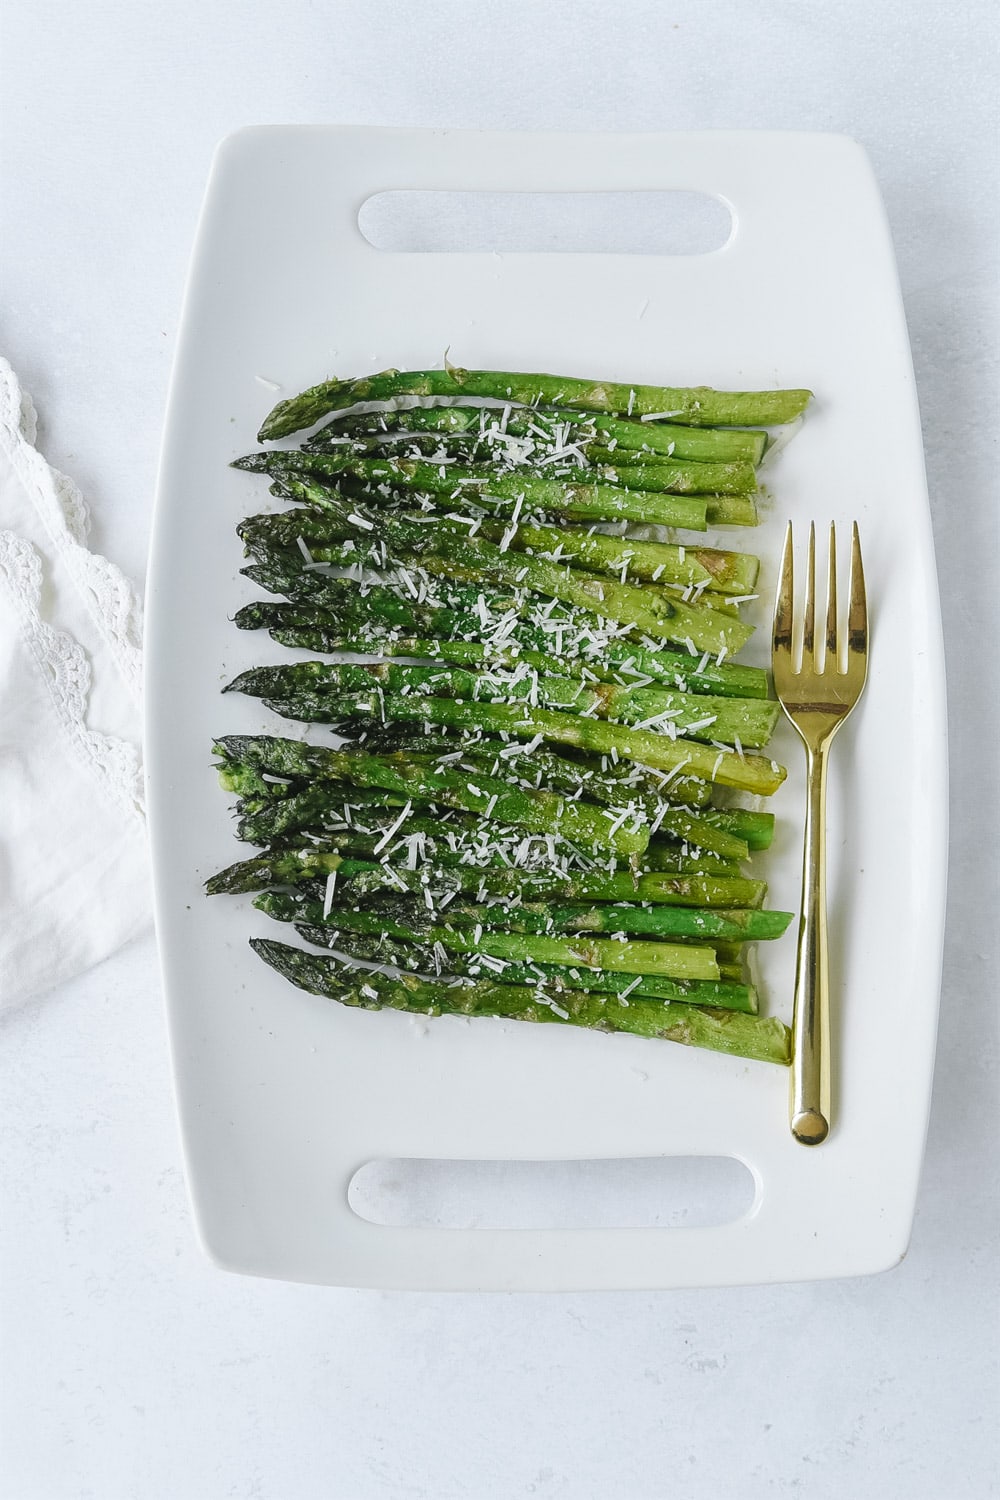 Grilled asparagus with parmesan cheese